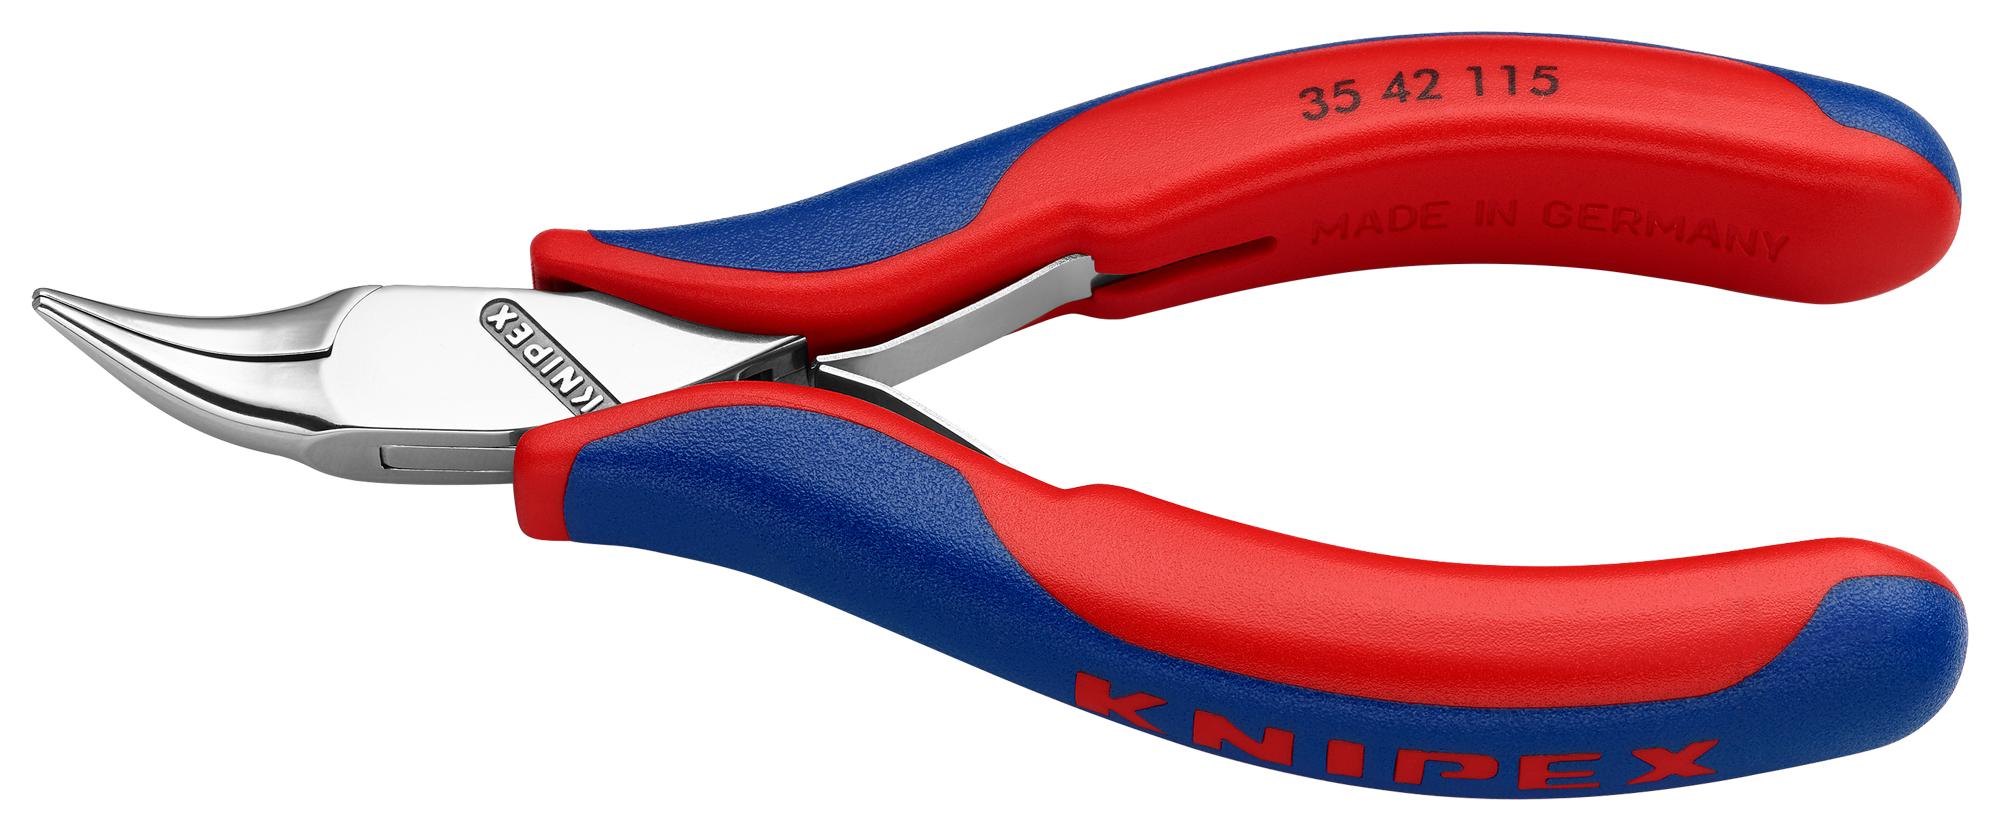 35 42 115 RELAY ADJUSTING PLIERS KNIPEX